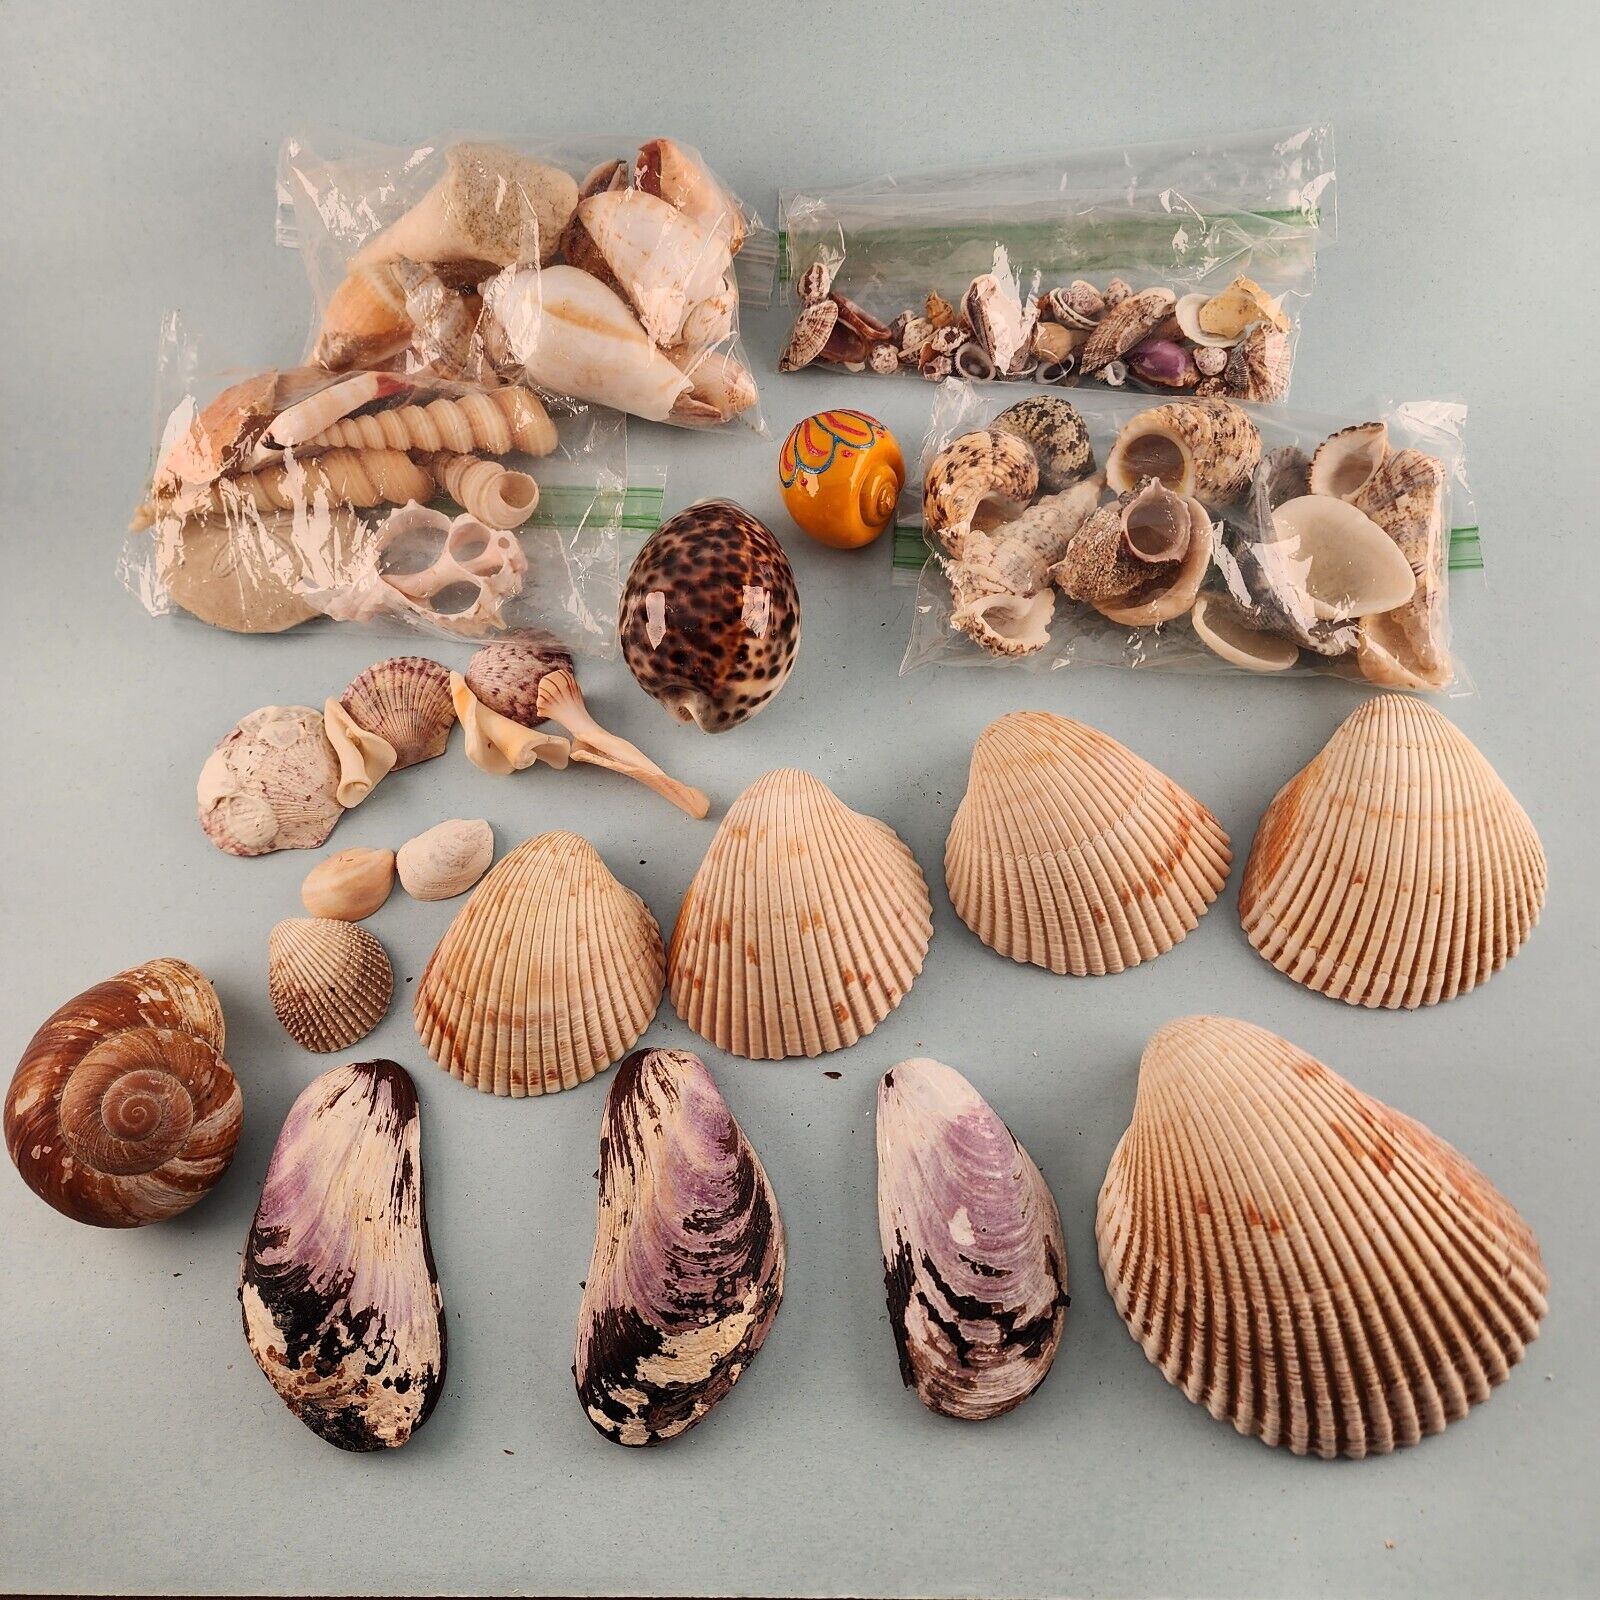 Seashells 2 Pound Lot Various Smaller Shells for Art Projects Plus a Snail Shell